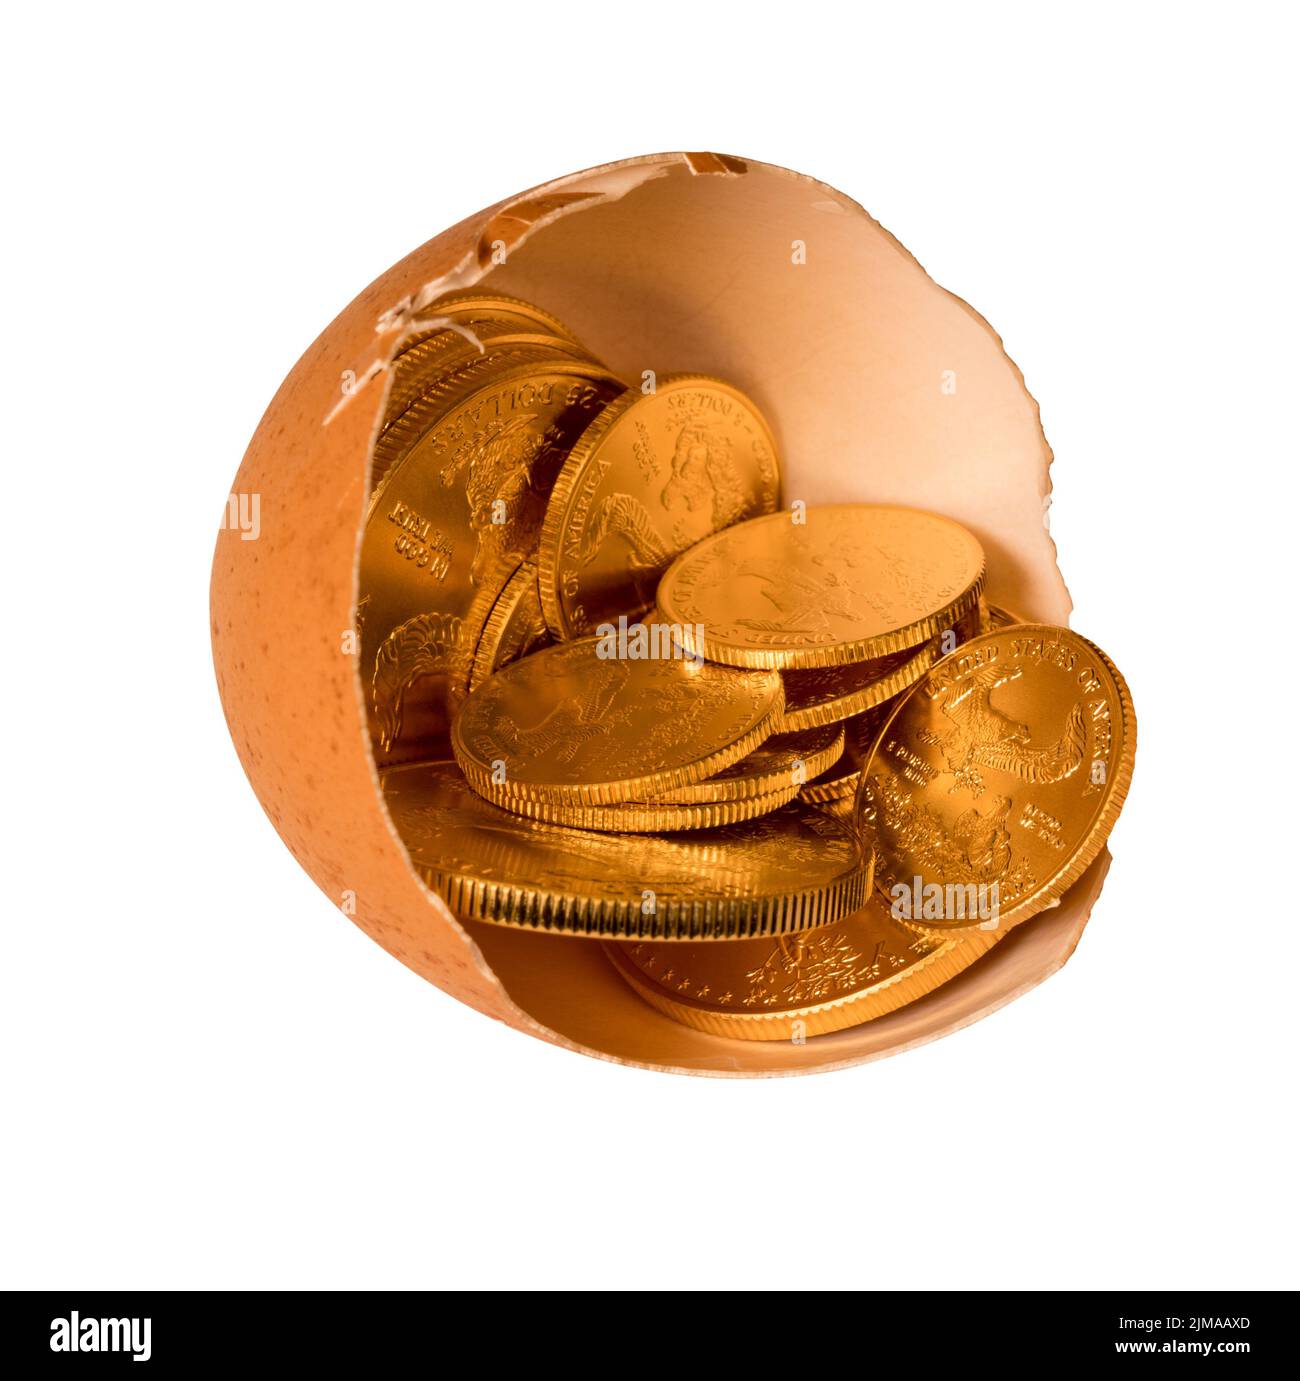 Pure gold coins in egg shell illustrating savings Stock Photo